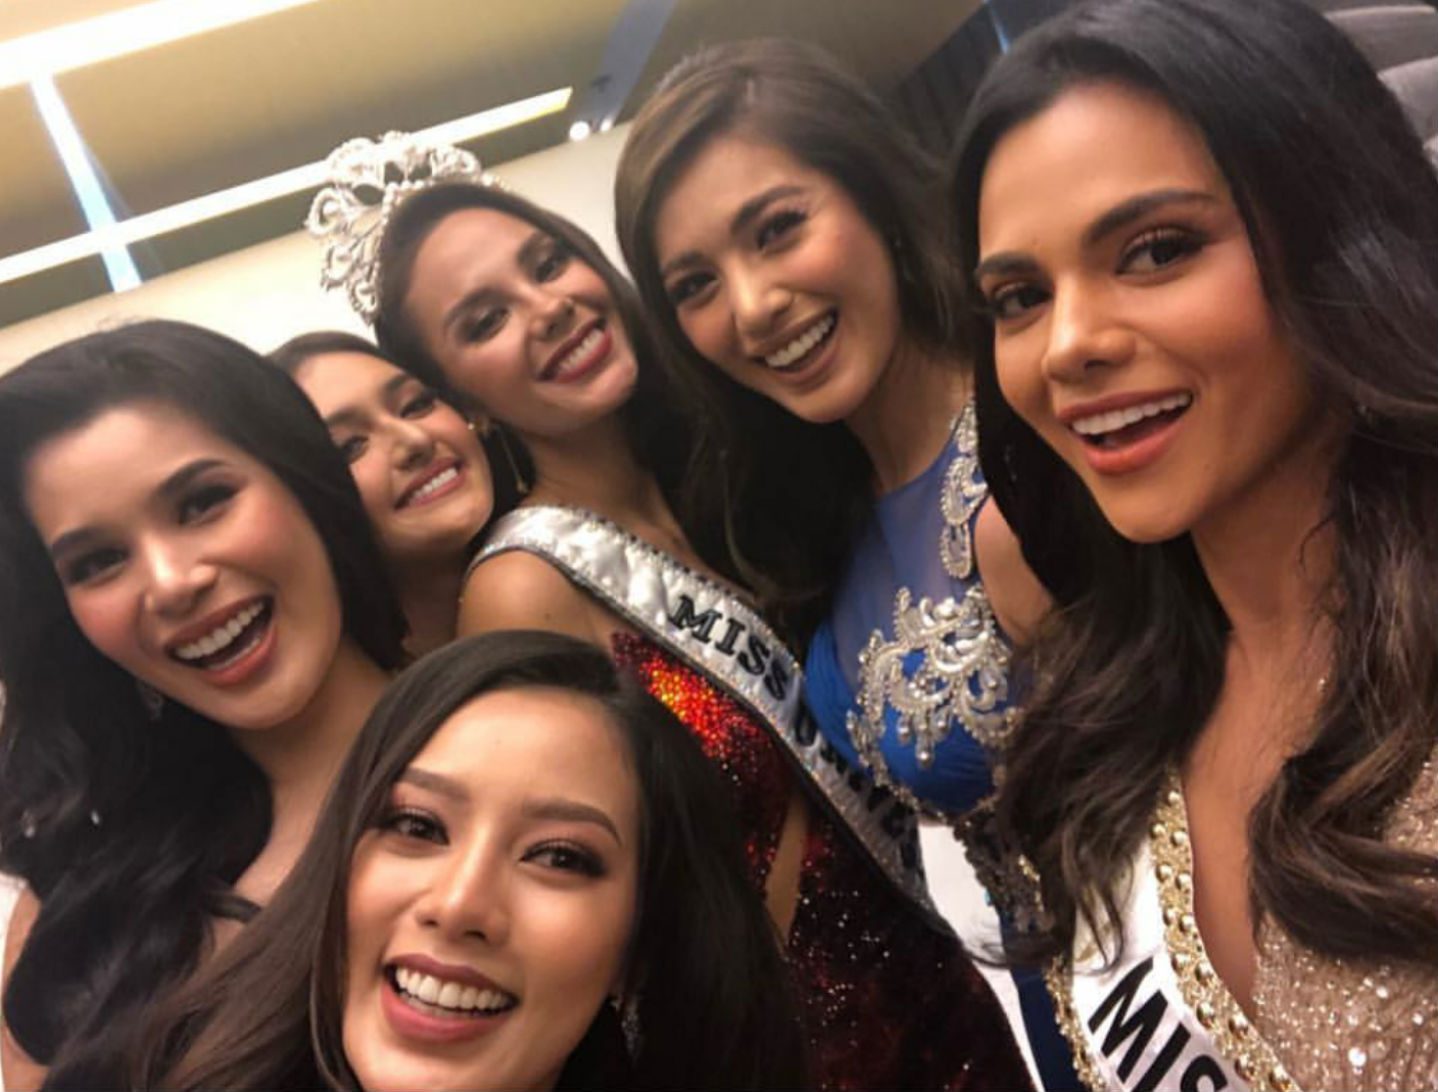 IN PHOTOS: Bb Pilipinas 2018 queens reunite for photoshoot